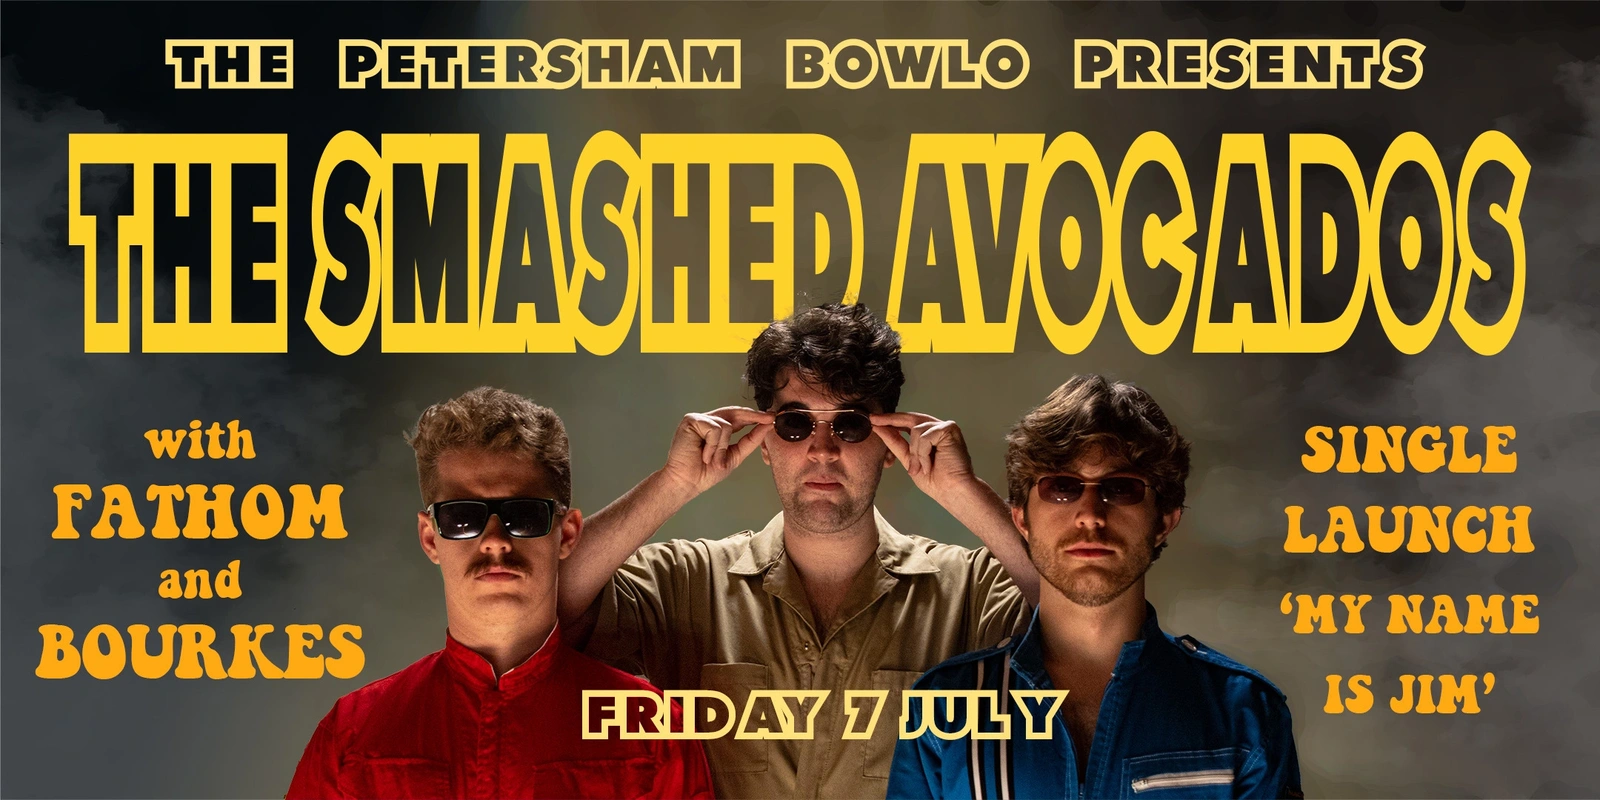 The Petersham Bowlo Presents, The Smashed Avocados, with Fathom and Bourke's. Single Lauch 'My Name Is Jim', Friday 7 July